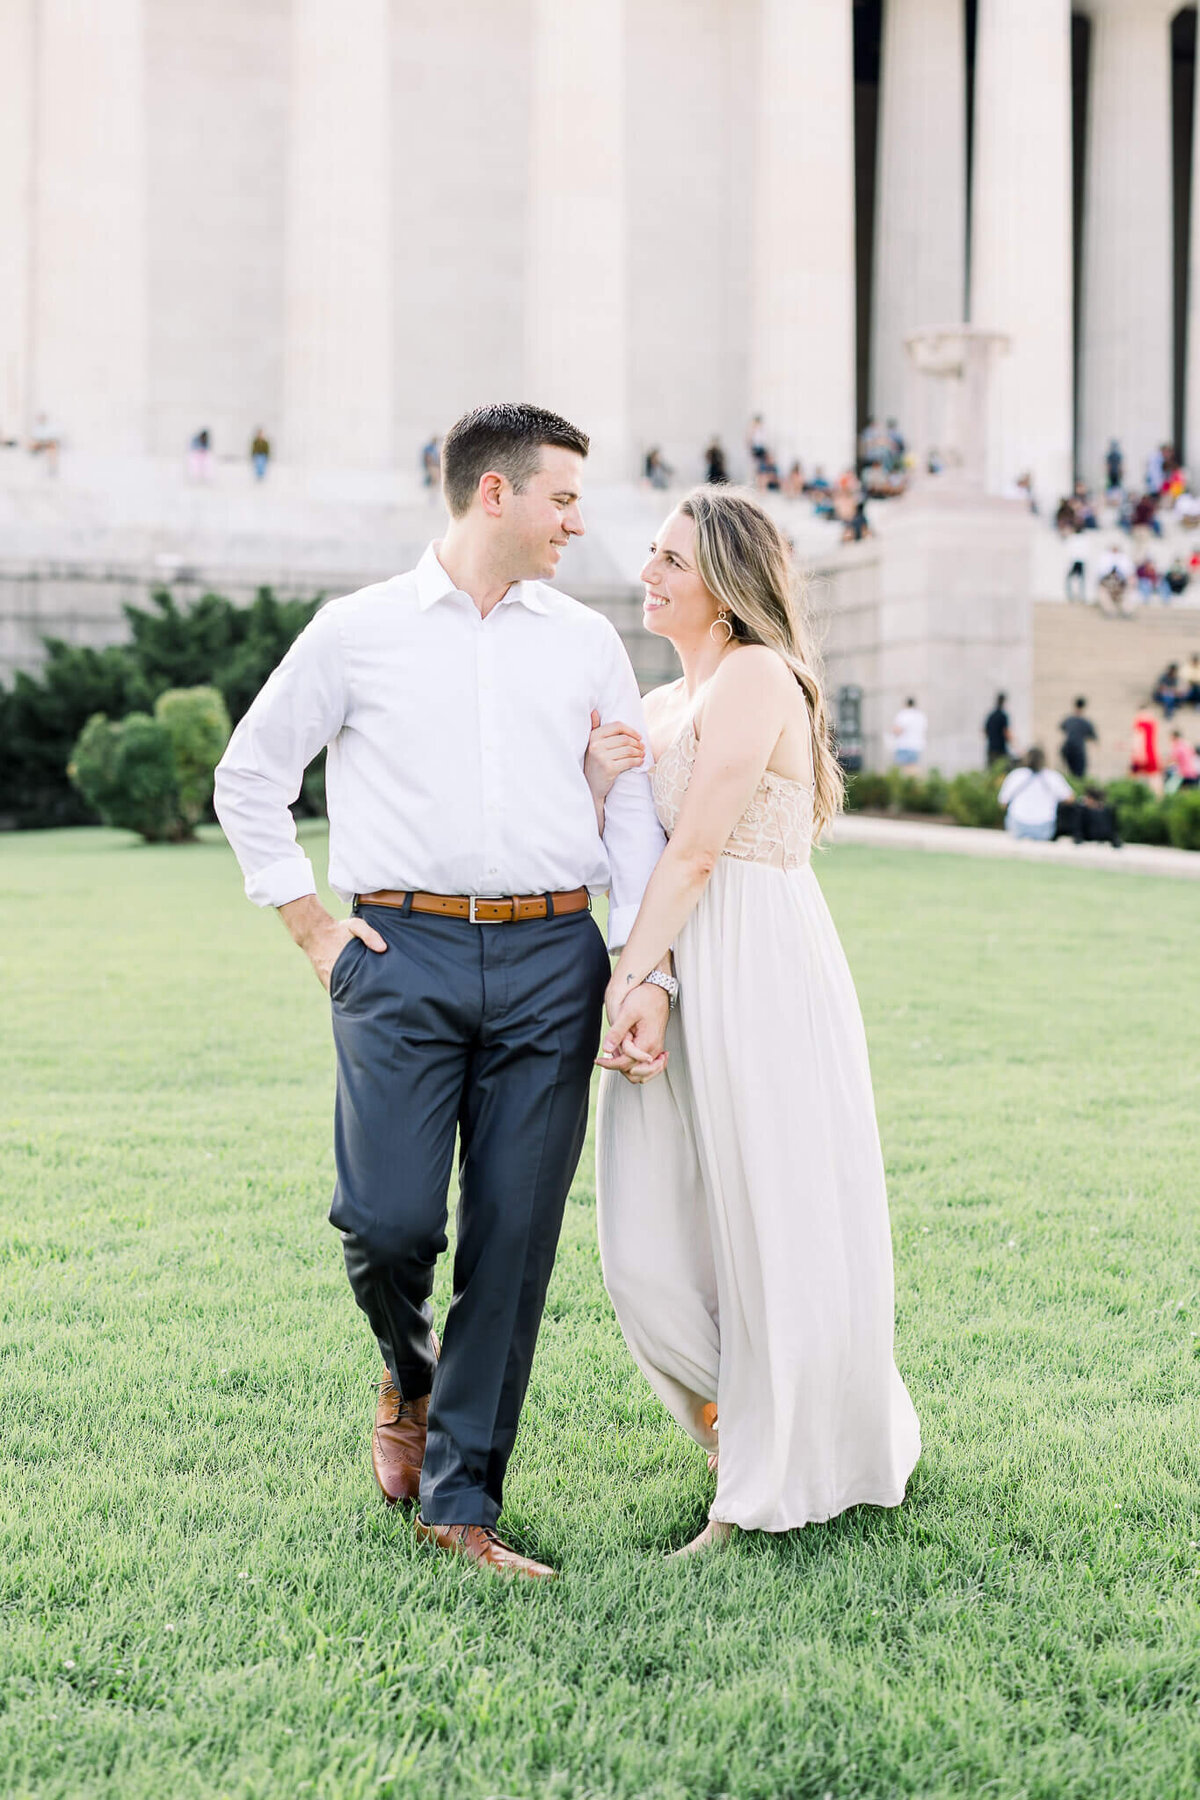 engagement-lincoln-memorial-proposal-photography-washington-DC-virginia-maryland-modern-light-and-airy-classic-timeless-romantic-46